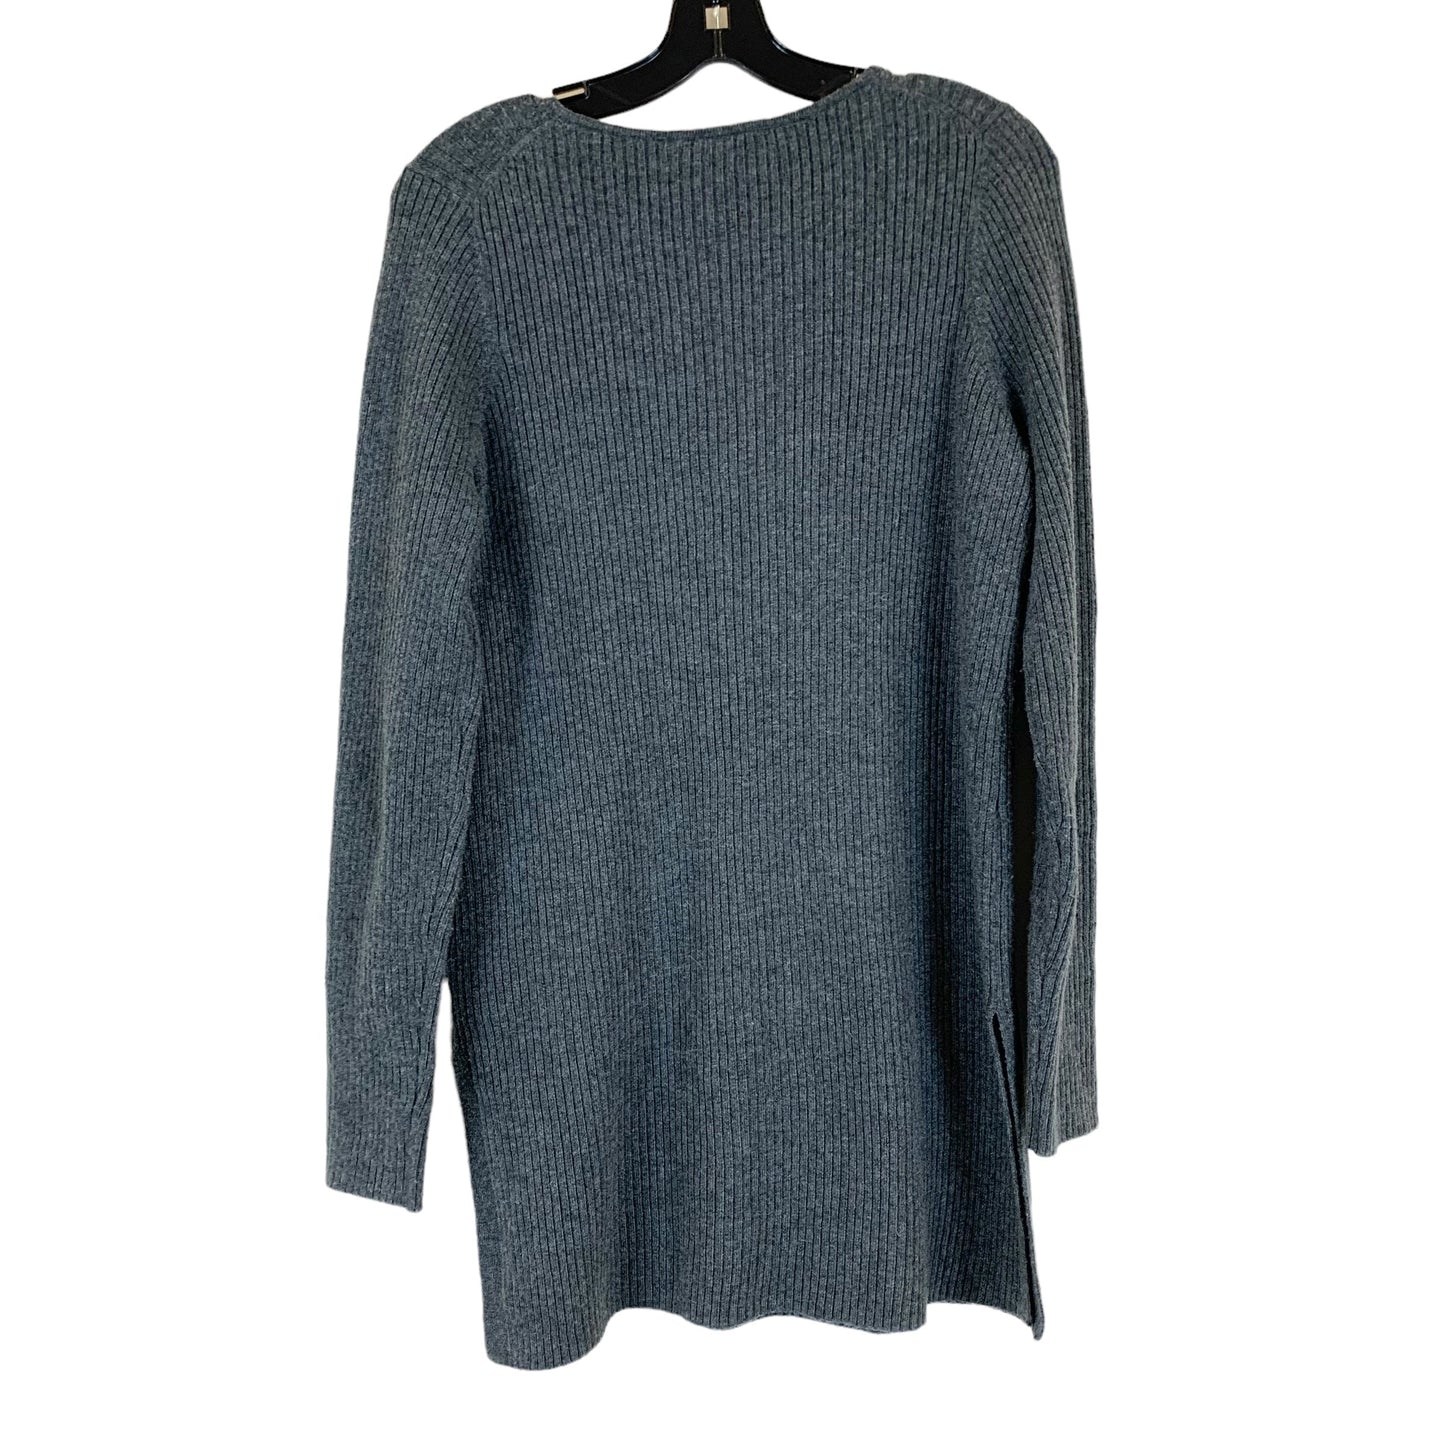 Tunic Long Sleeve By Anthropologie  Size: M